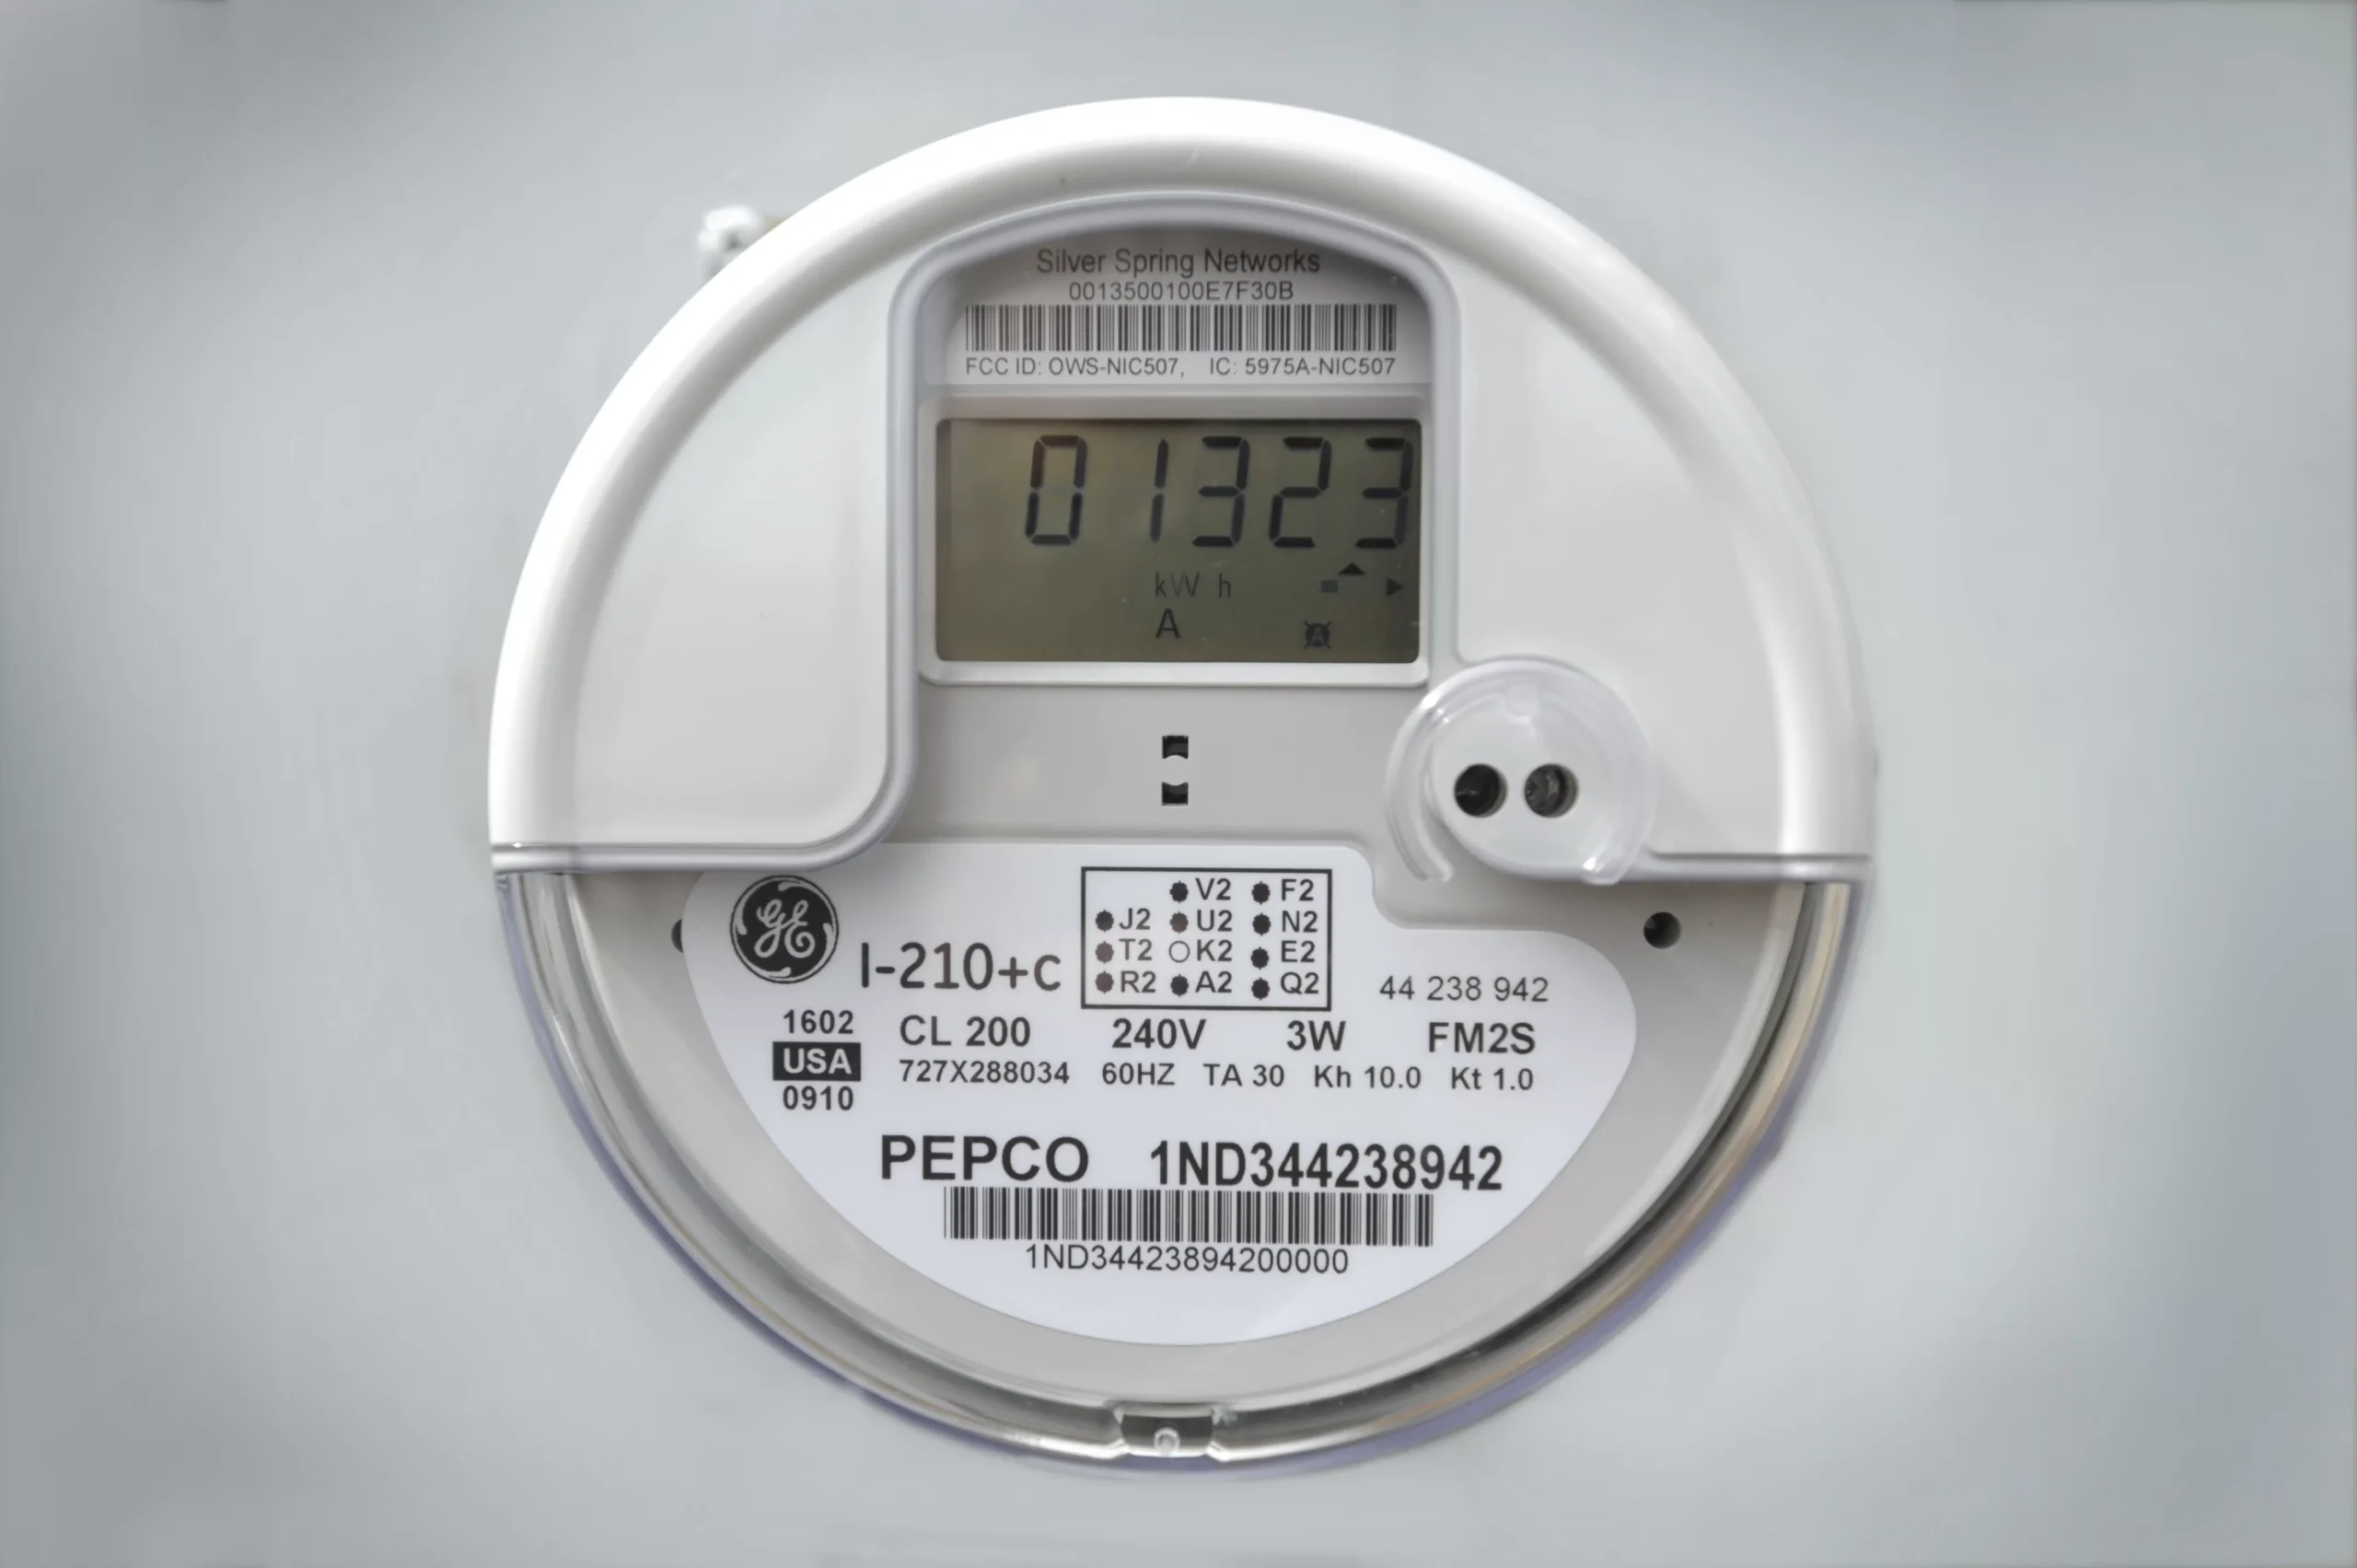 smart green tips, green tips, How to Use a Smart Meter to Save on Your Electricity Usage,, Green Living